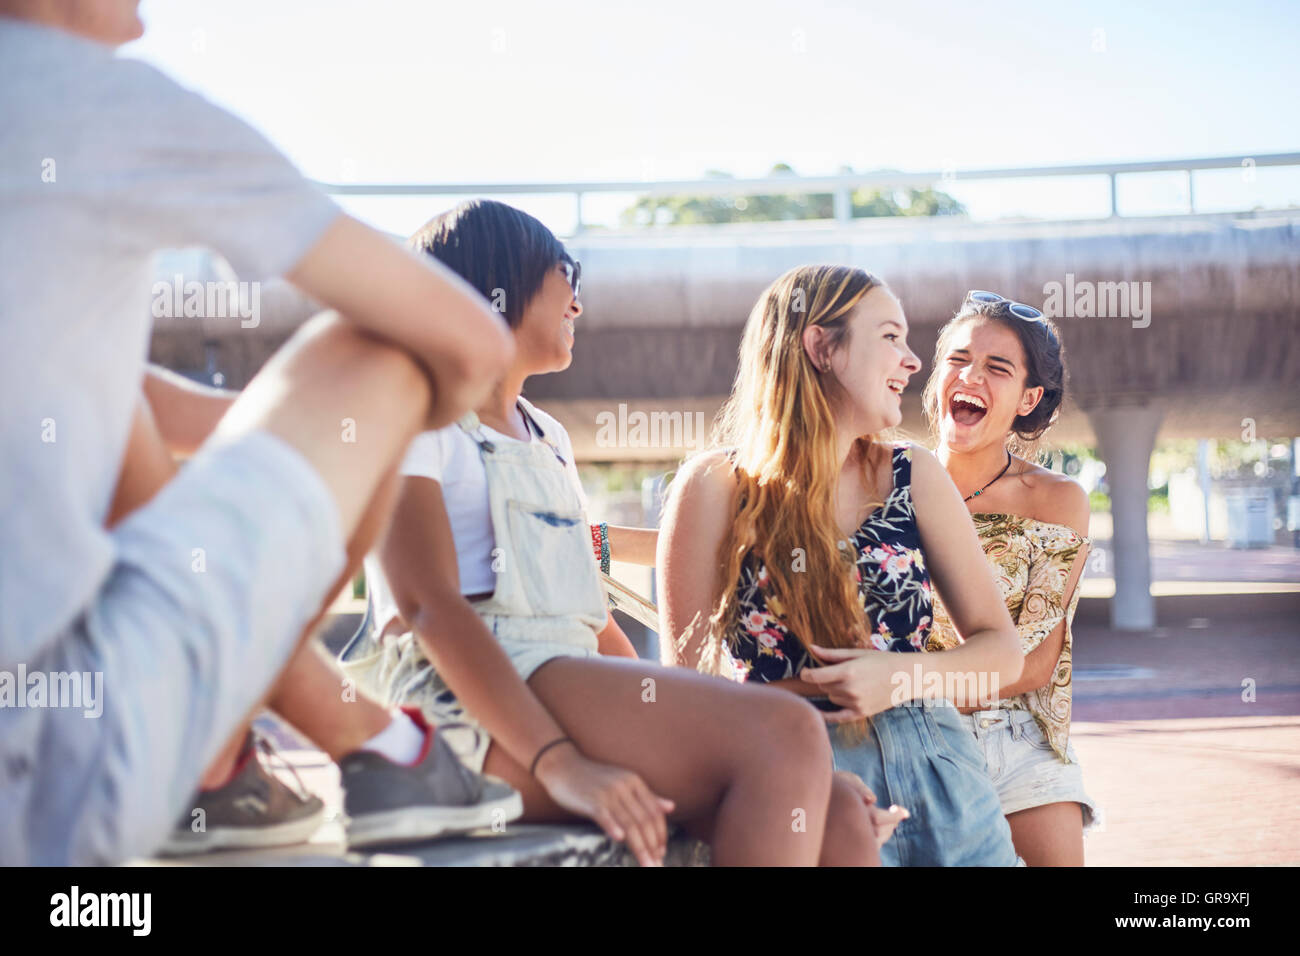 Teenage girls laughing hanging out at sunny skate park Stock Photo